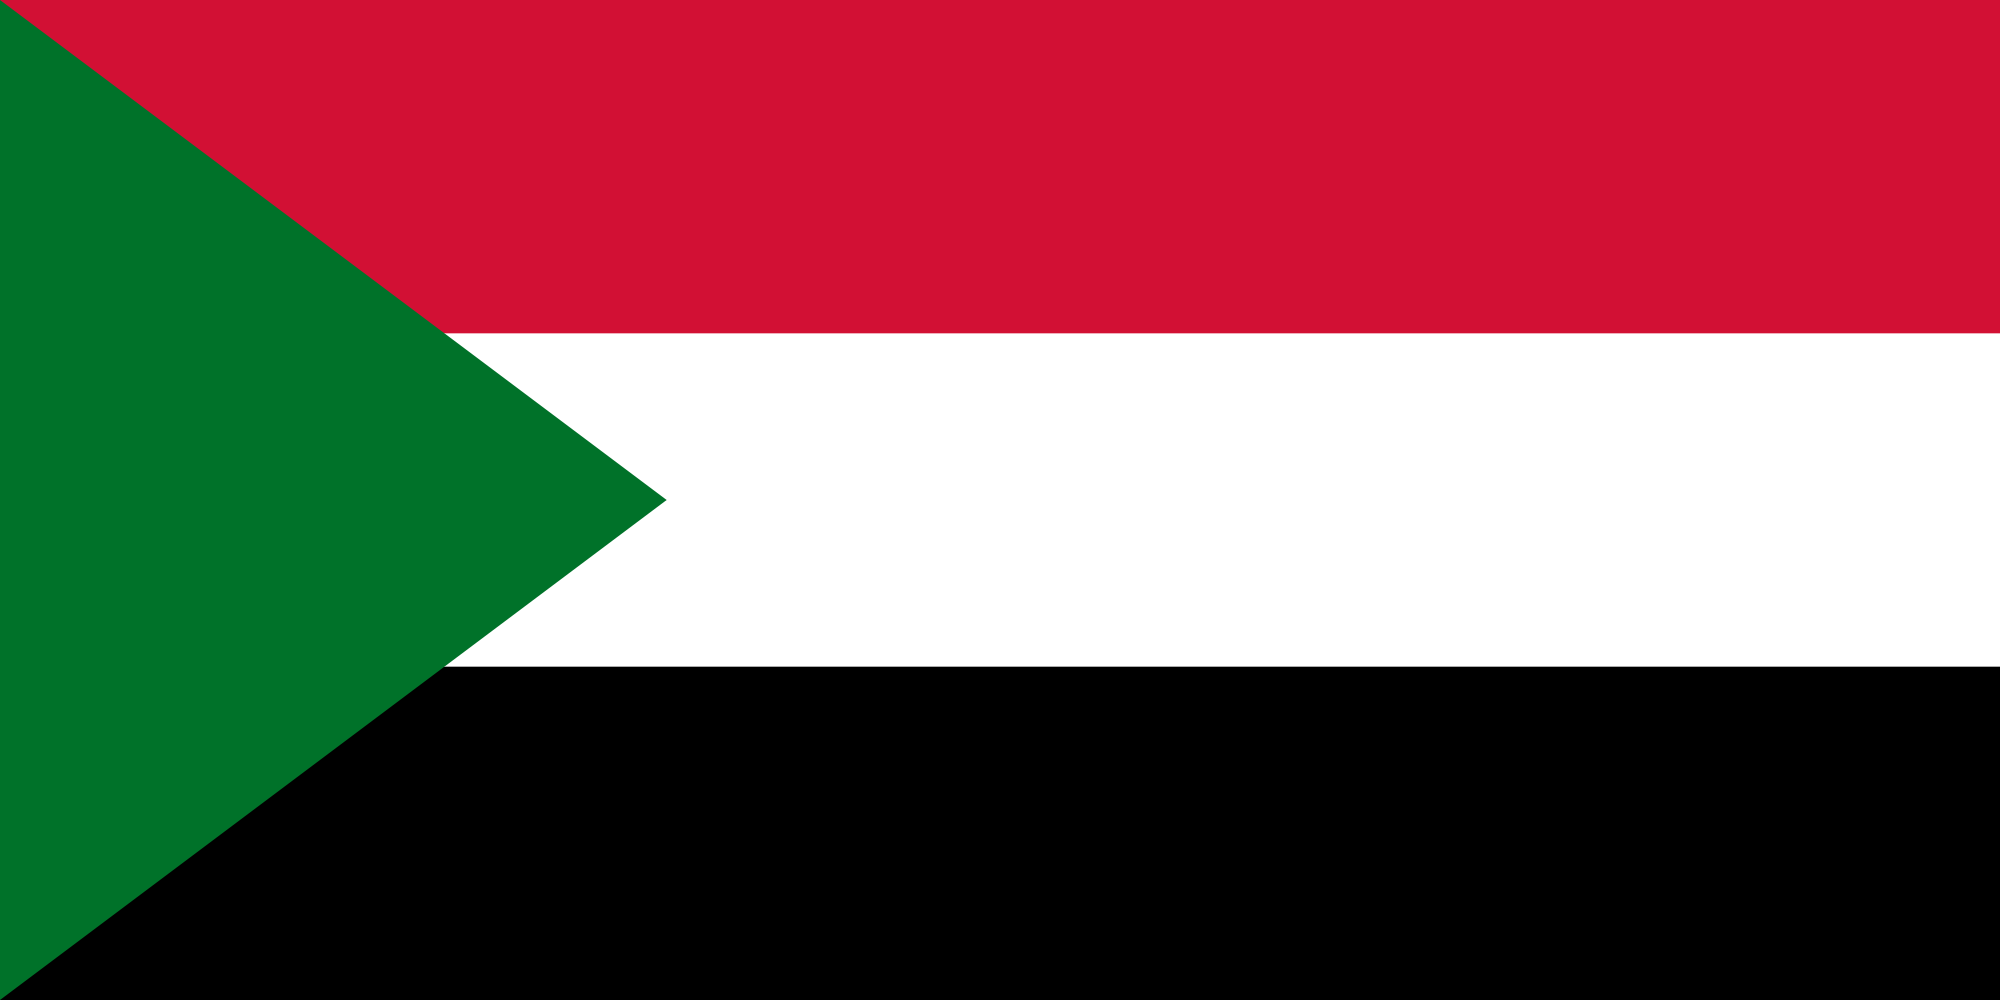 Welcome to Sudan! The 56th country to join the SUN Movement